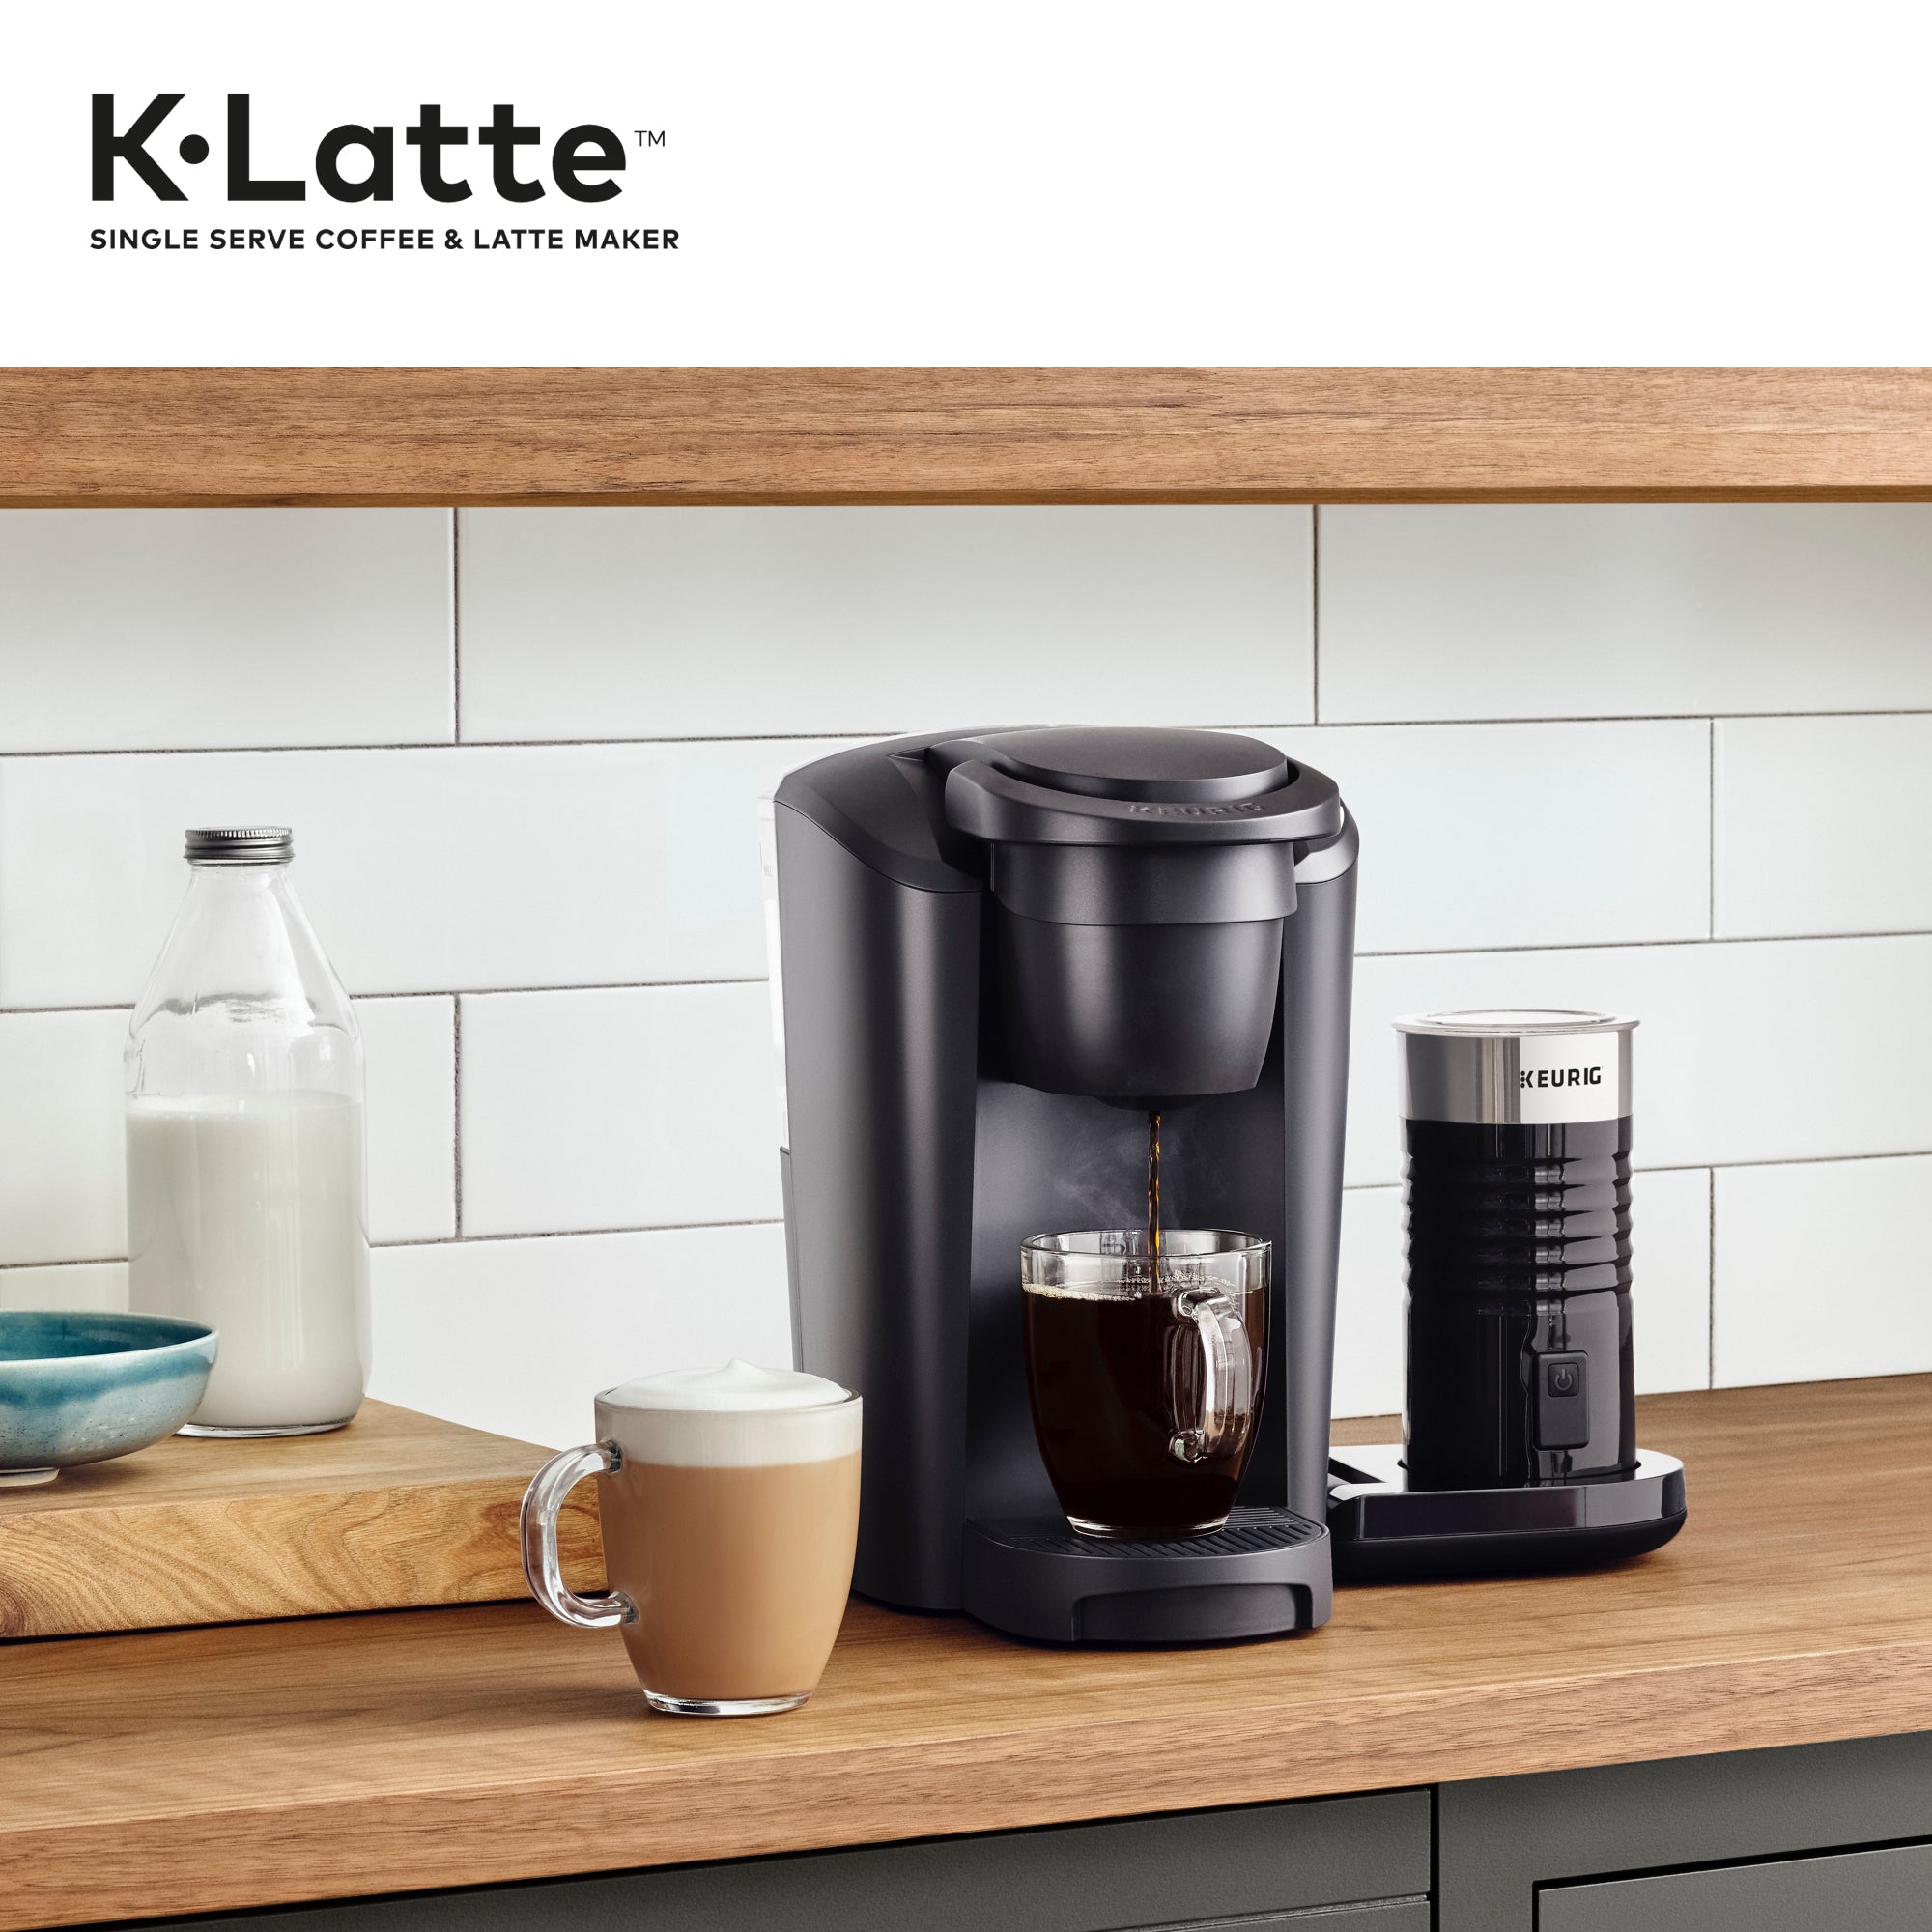 Keurig K-Latte Single Serve K-Cup Coffee and Latte Maker, Comes with Milk Frother, Compatible With all Keurig K-Cup Pods, Black Keurig K-Latte Single Serve